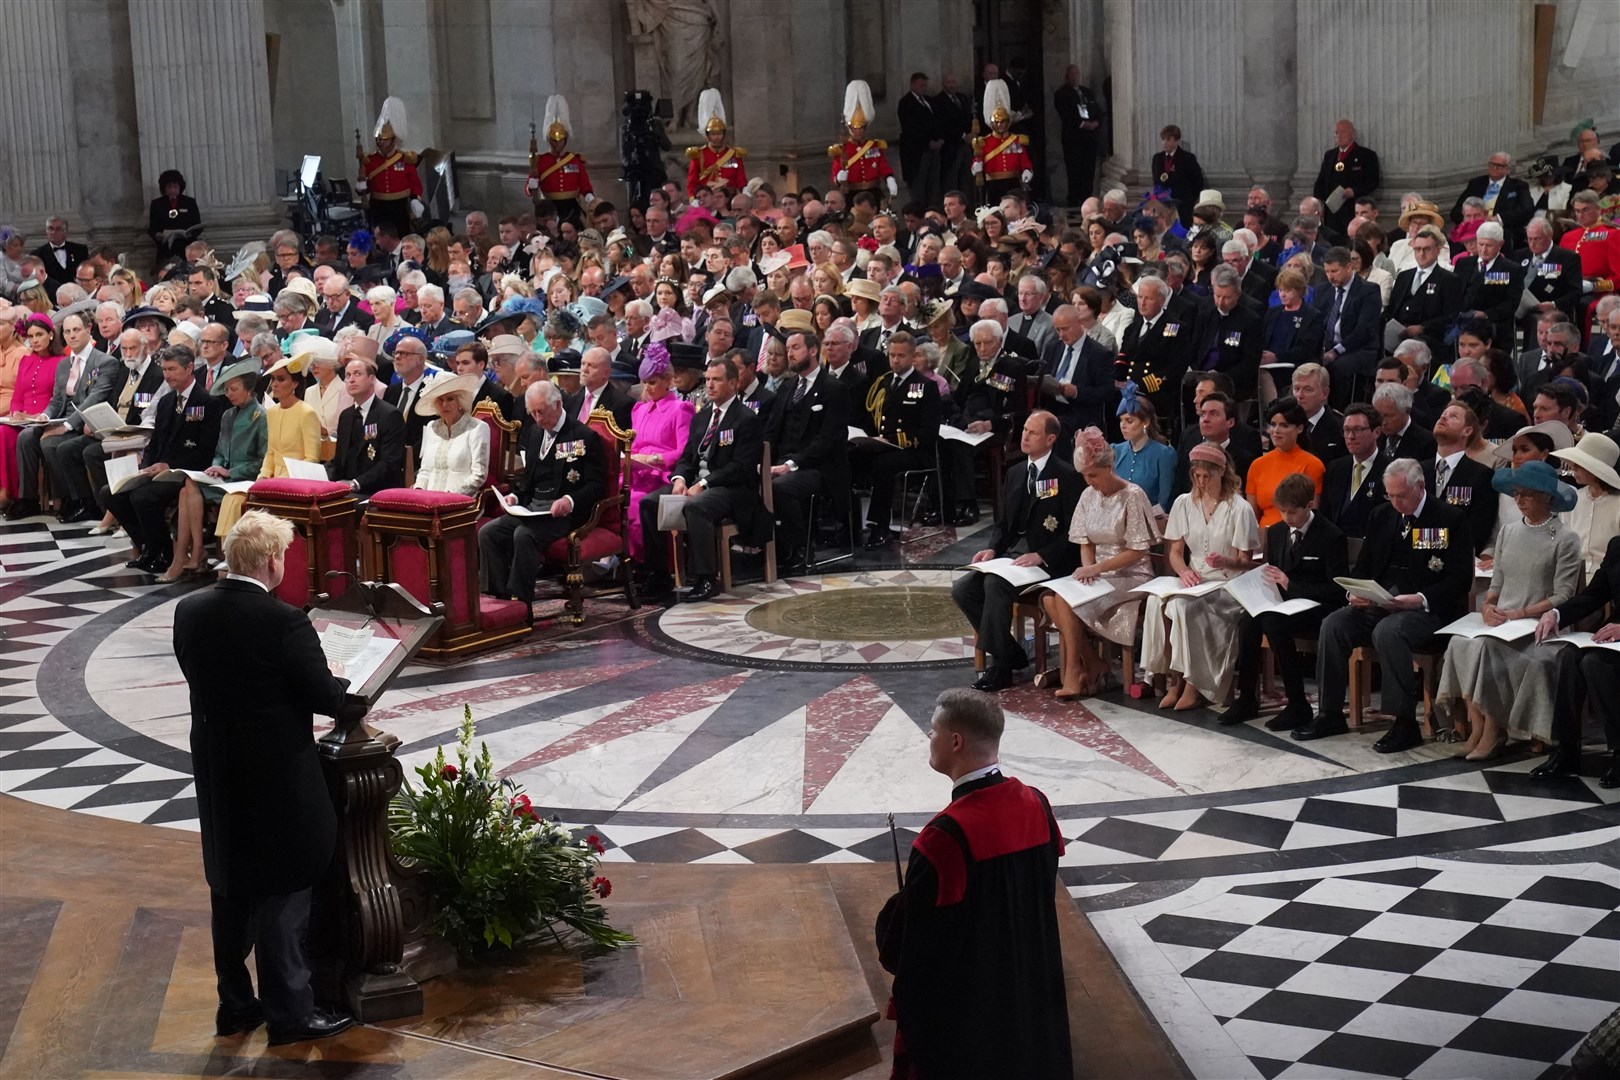 The royals – with Harry and Meghan far right – and congregation listen as Prime Minister Boris Johnson gives a reading (Aaron Chown/PA)